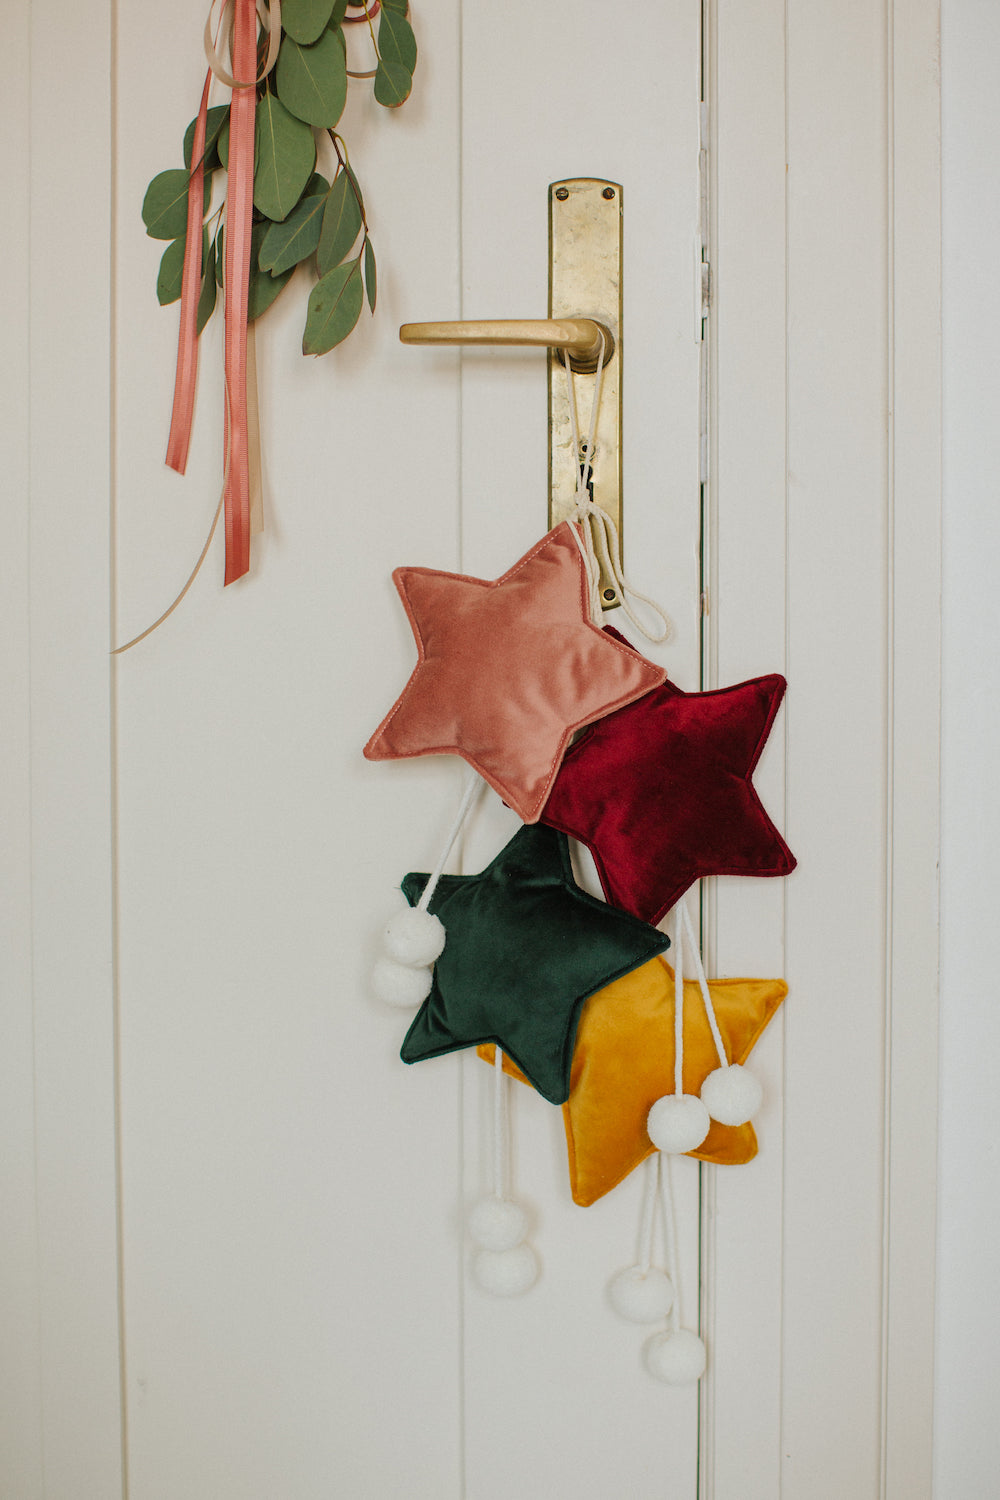 velvet little star pendant yellow with pompoms by bettys home few stars hanging on door handle